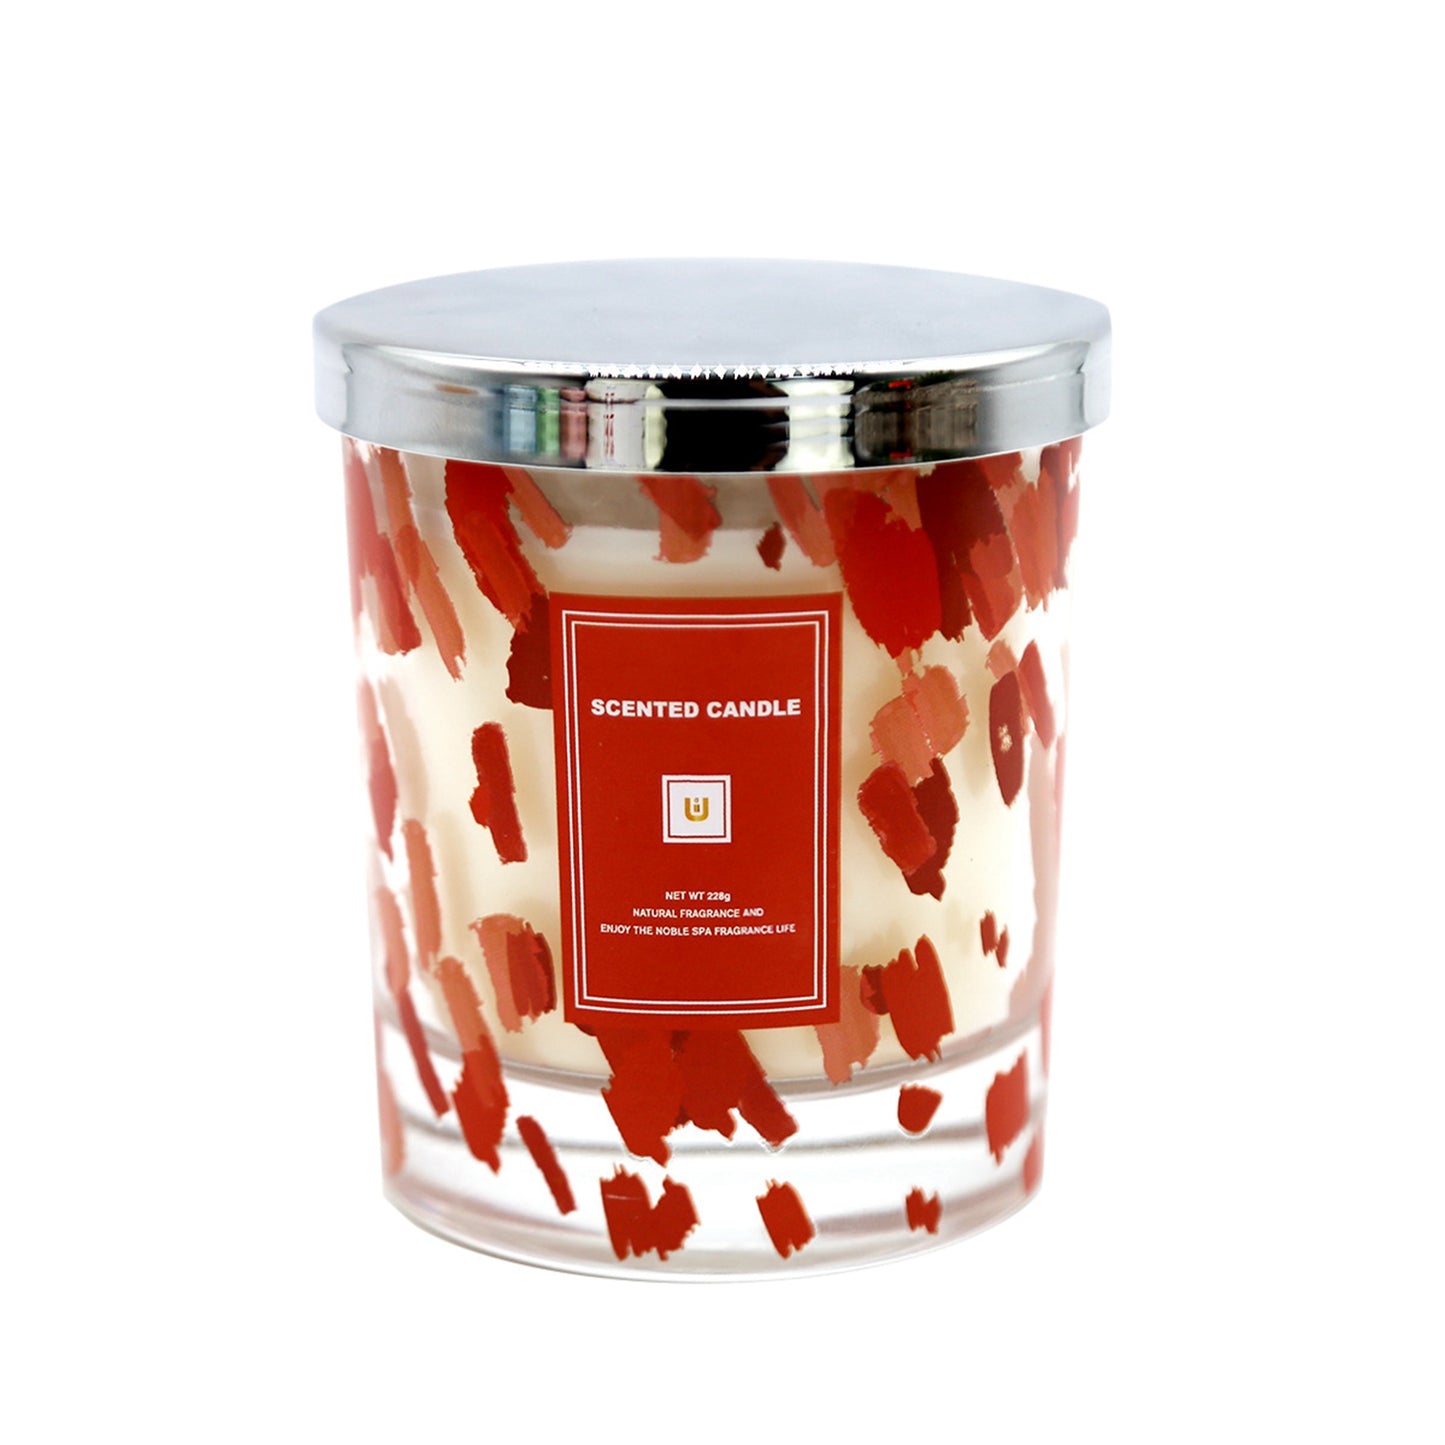 The colored glass scented candle has five scents 6-pack